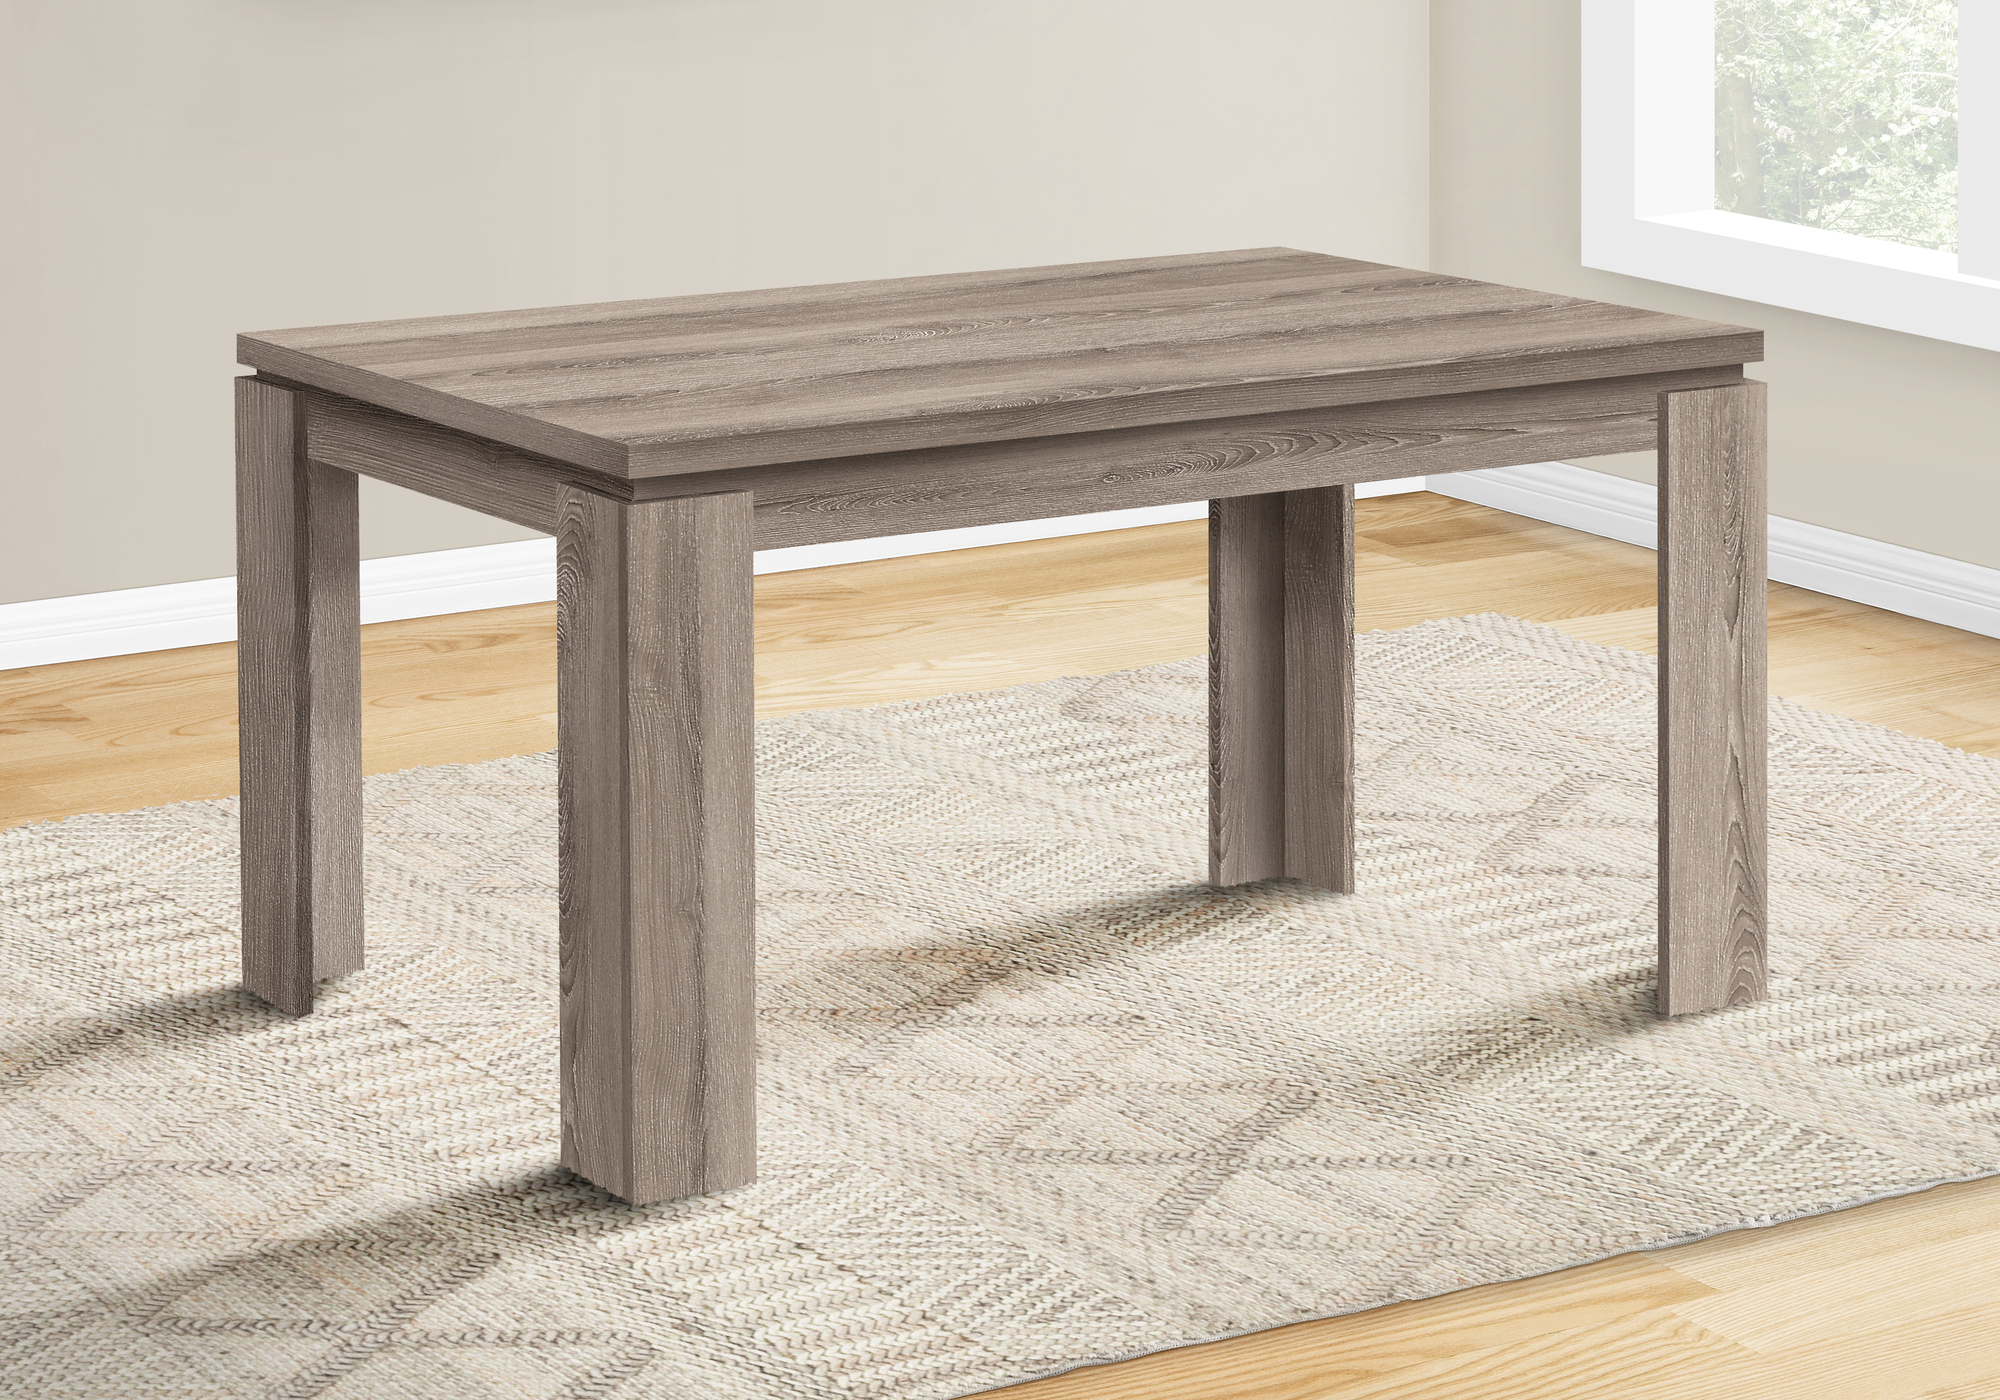 DINING TABLE - 36"X 60" / DARK TAUPE 